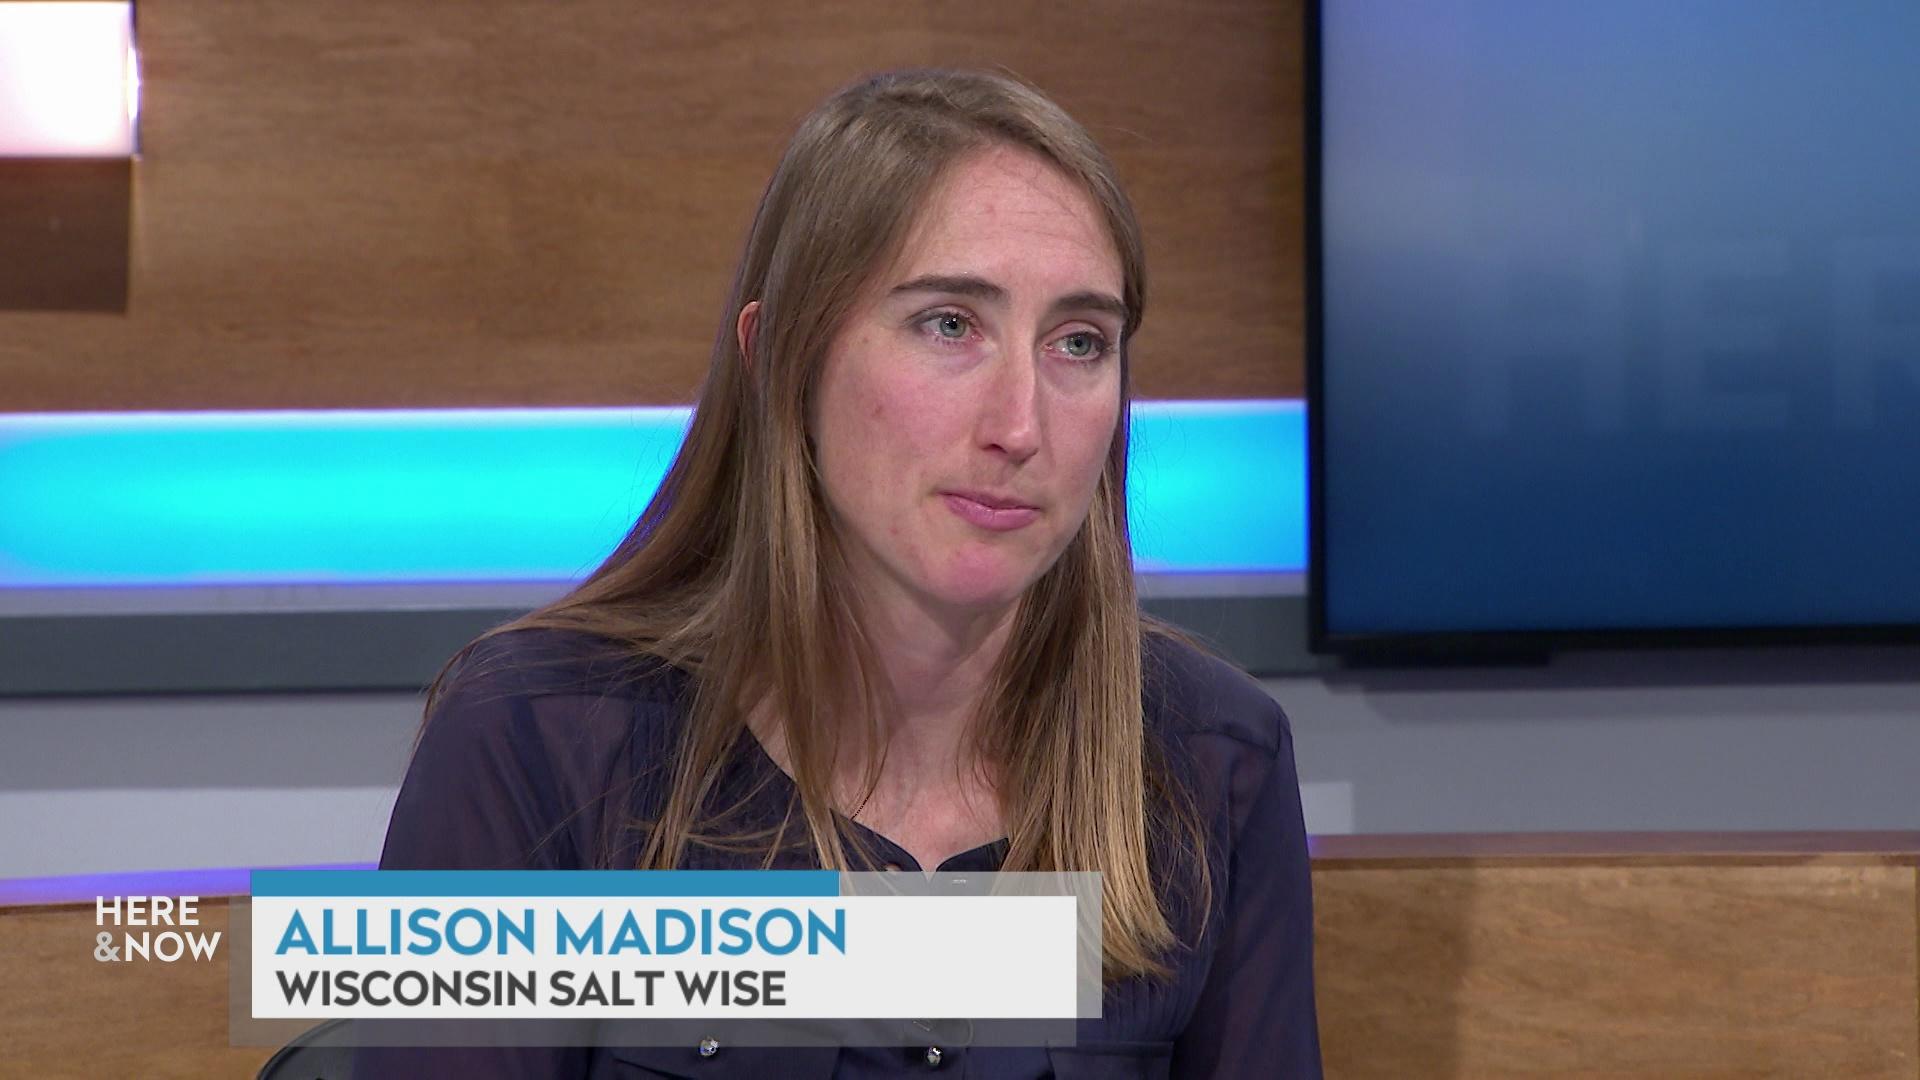 Allison Madison on cutting winter road salt to protect water